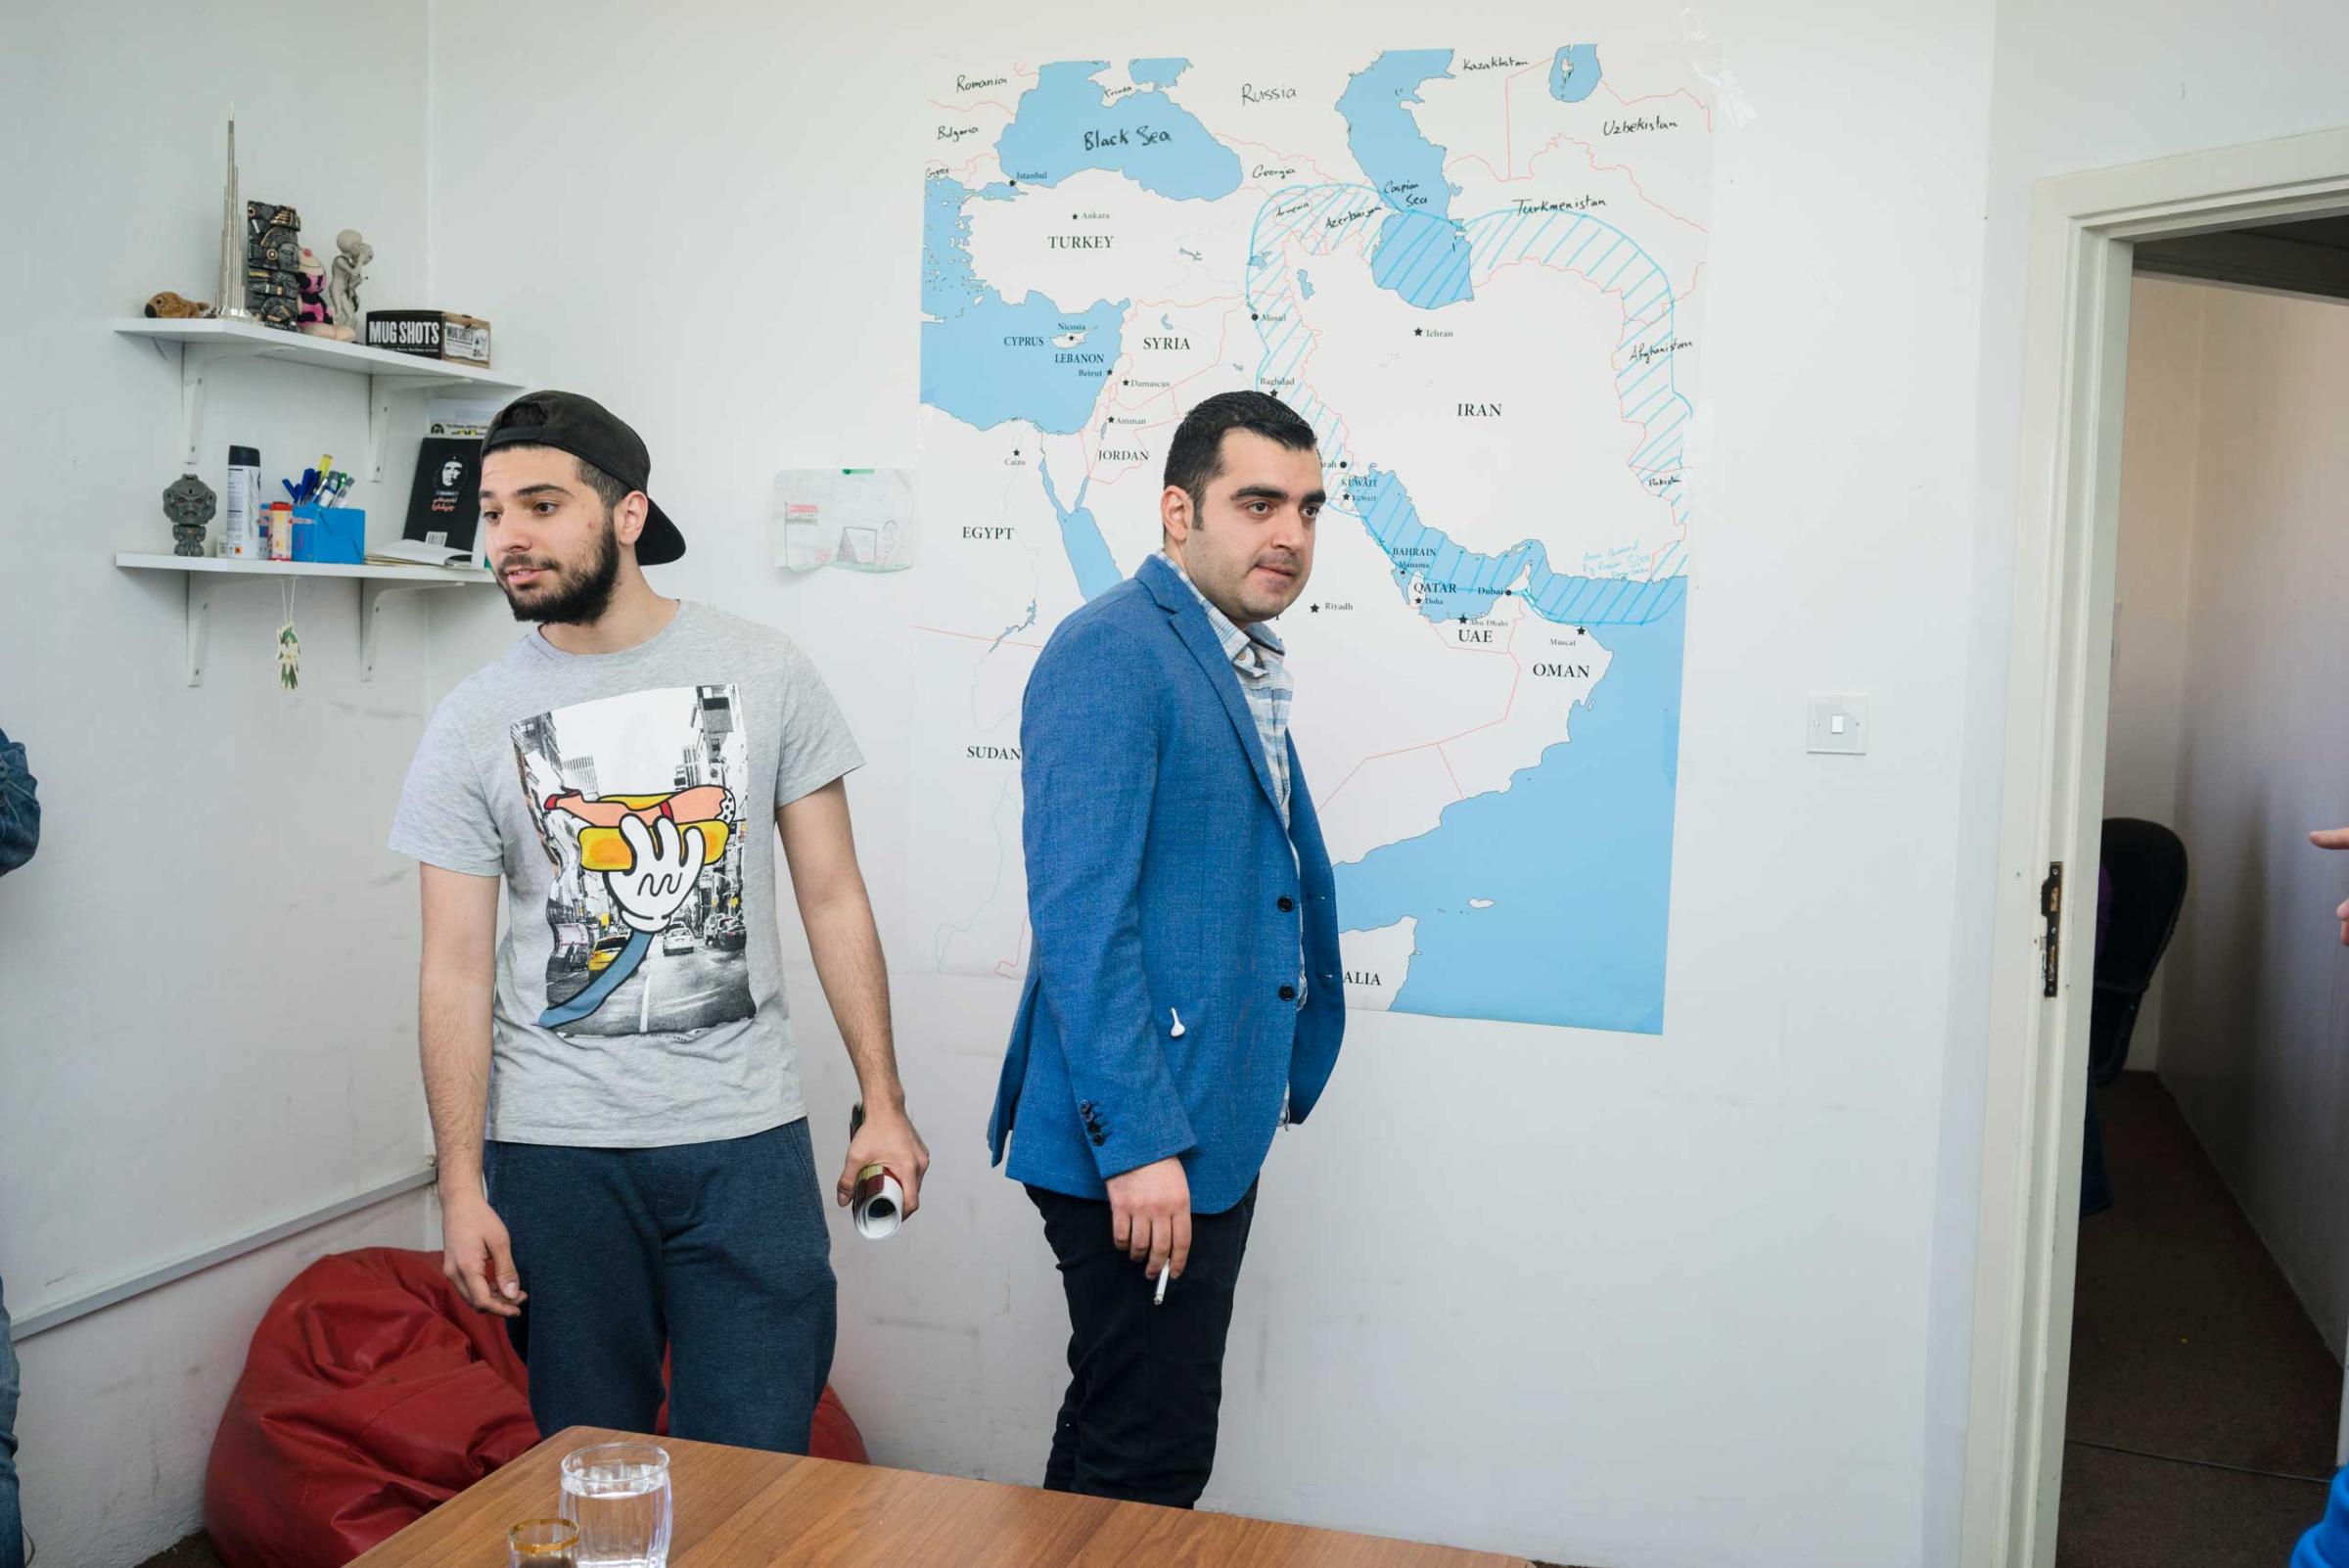 Shwan Sarheng (Left), Ahmad Al-Basheer (Right) at the Al-Basheer show studios in Amman Jordan, practice scripts, prepare sketches and make dress rehearsals for the airing of the new show in June.